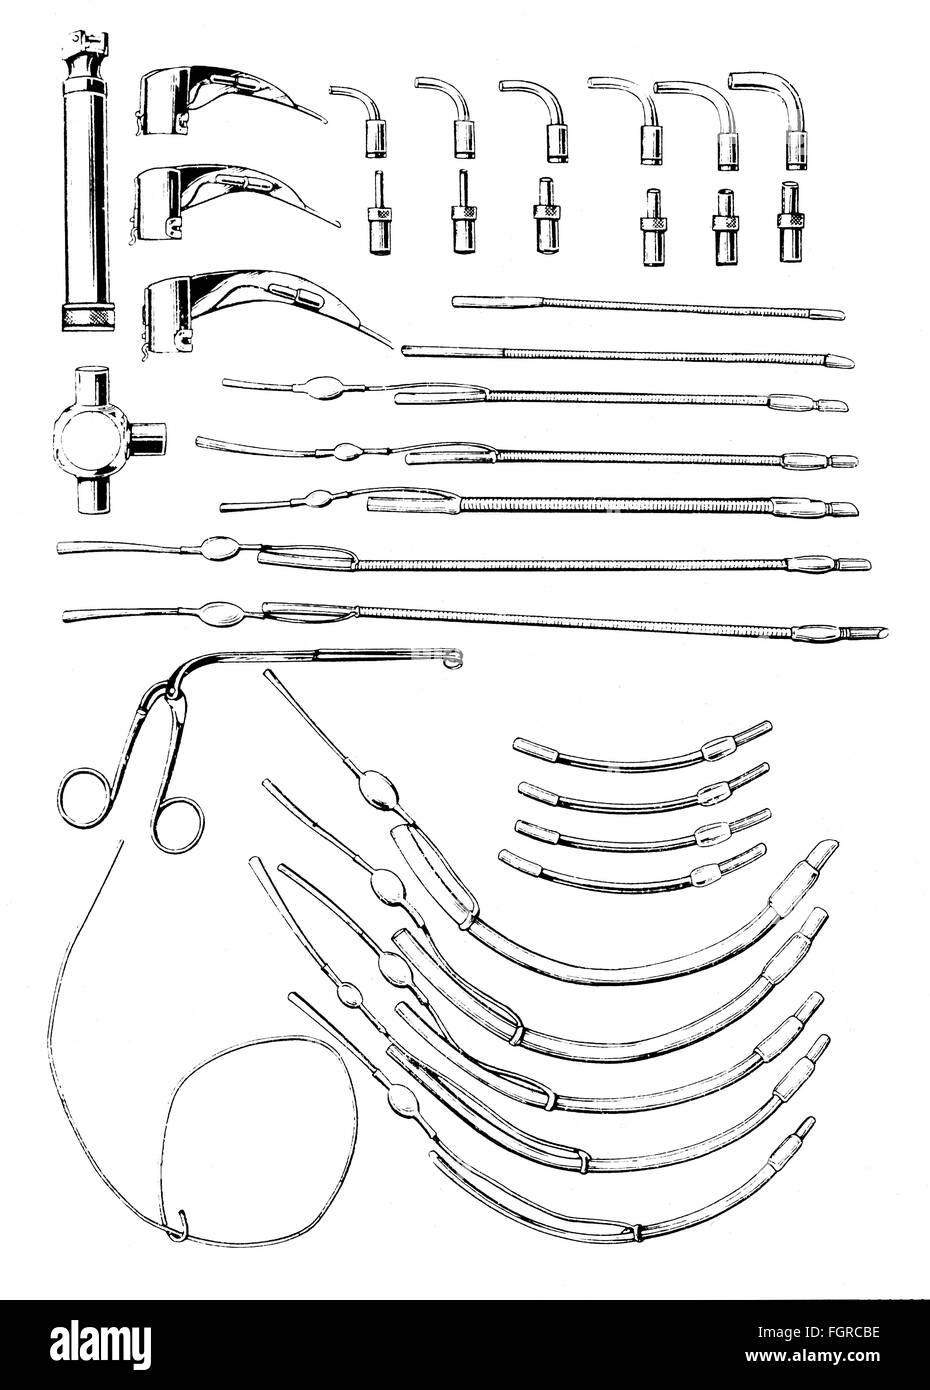 medicine, instruments / equipment, different surgical instruments, drawing, 20th century, 20th century, graphic, graphics, operation, undergo surgery, need surgery, surgery, laryngoscope, intubation tube, intubation, inserting a tube, lens tube, forceps, breathing valve, clipping, cut out, cut-out, cut-outs, object, objects, stills, medicine, medicines, devices, device, instrument, instruments, historic, historical, Additional-Rights-Clearences-Not Available Stock Photo